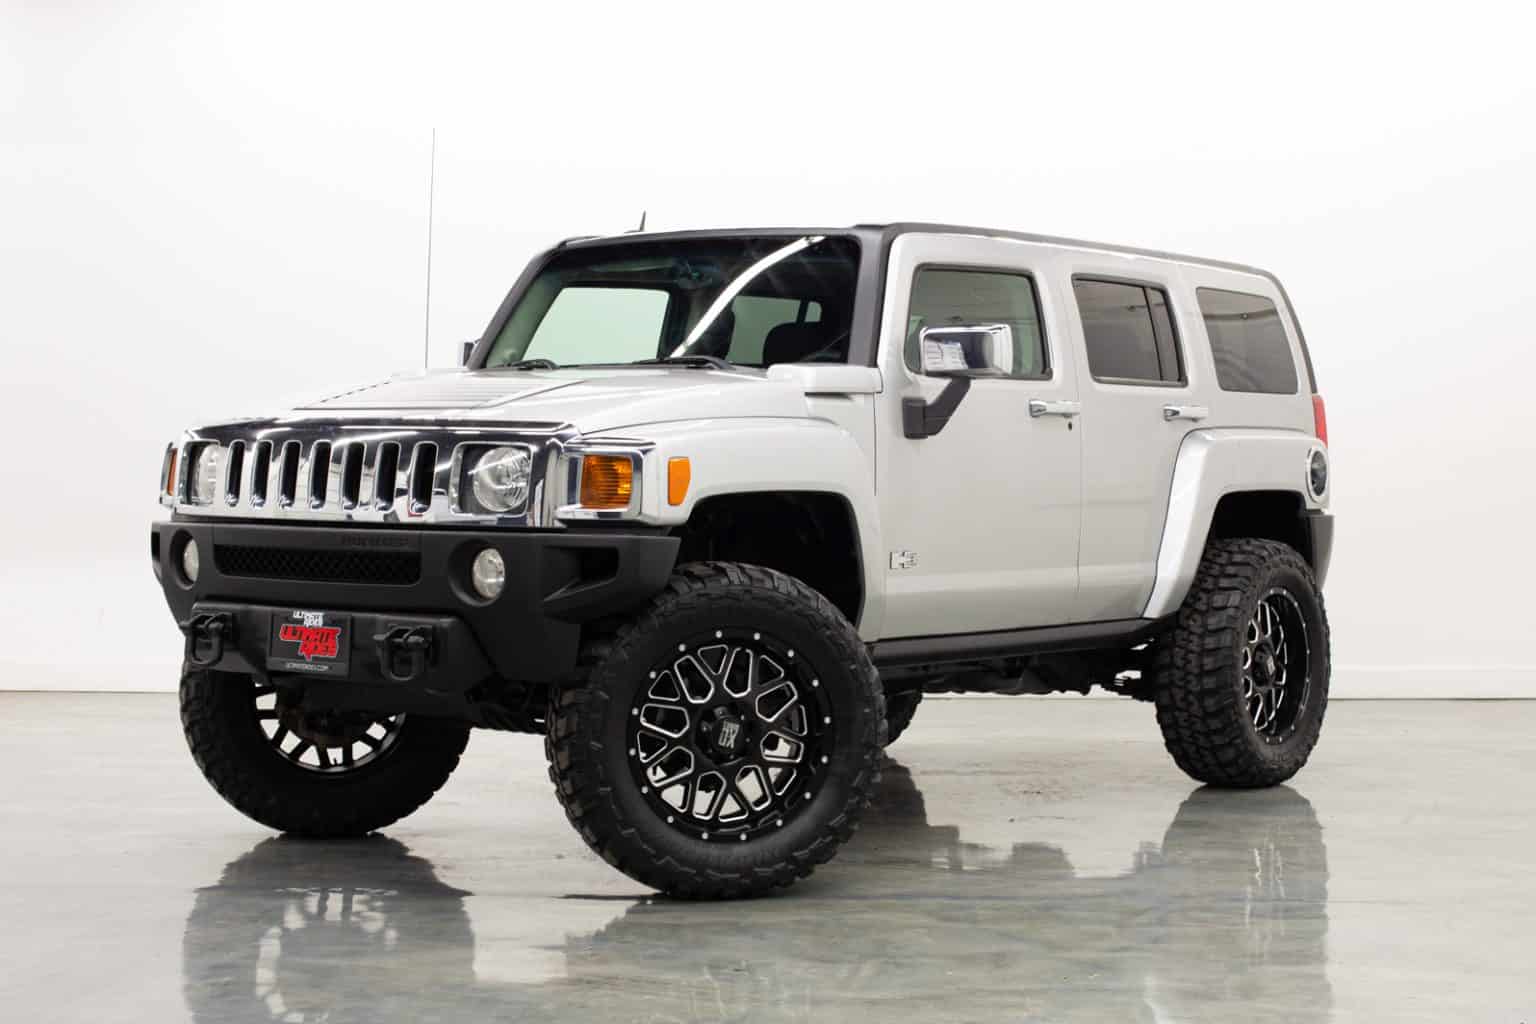 Lifted Hummer H3 for Sale